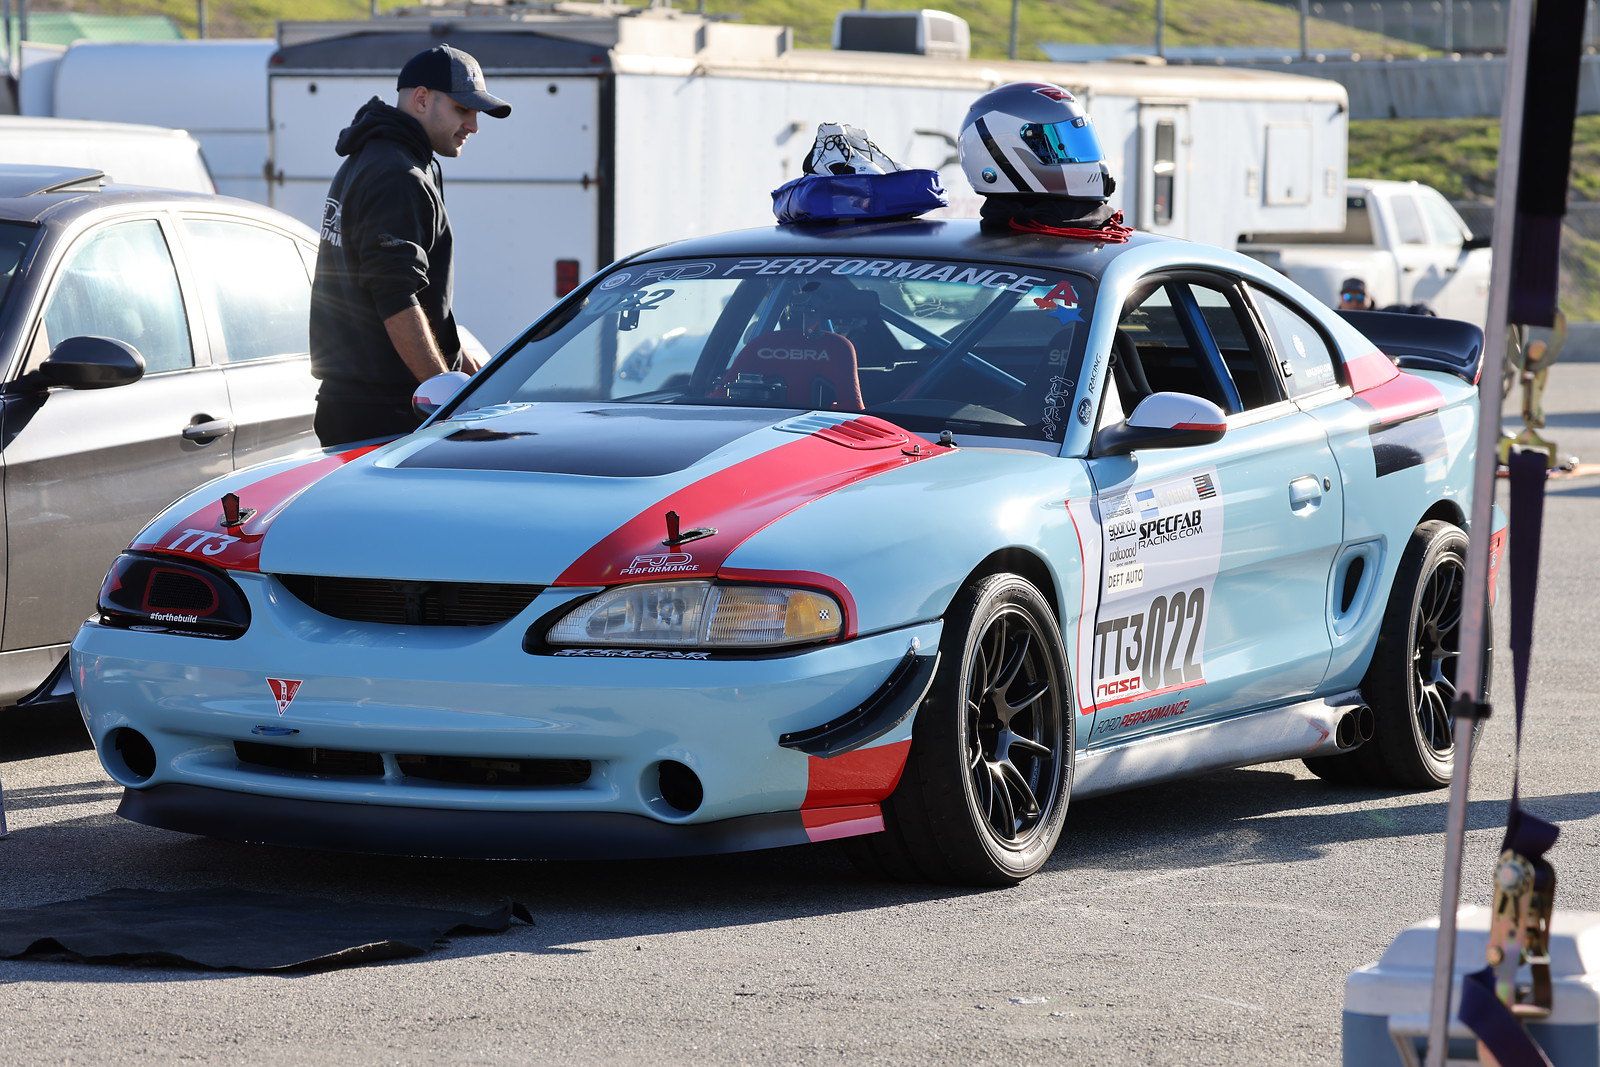 1997 Mustang
Road Race -  (Stealth Mare)